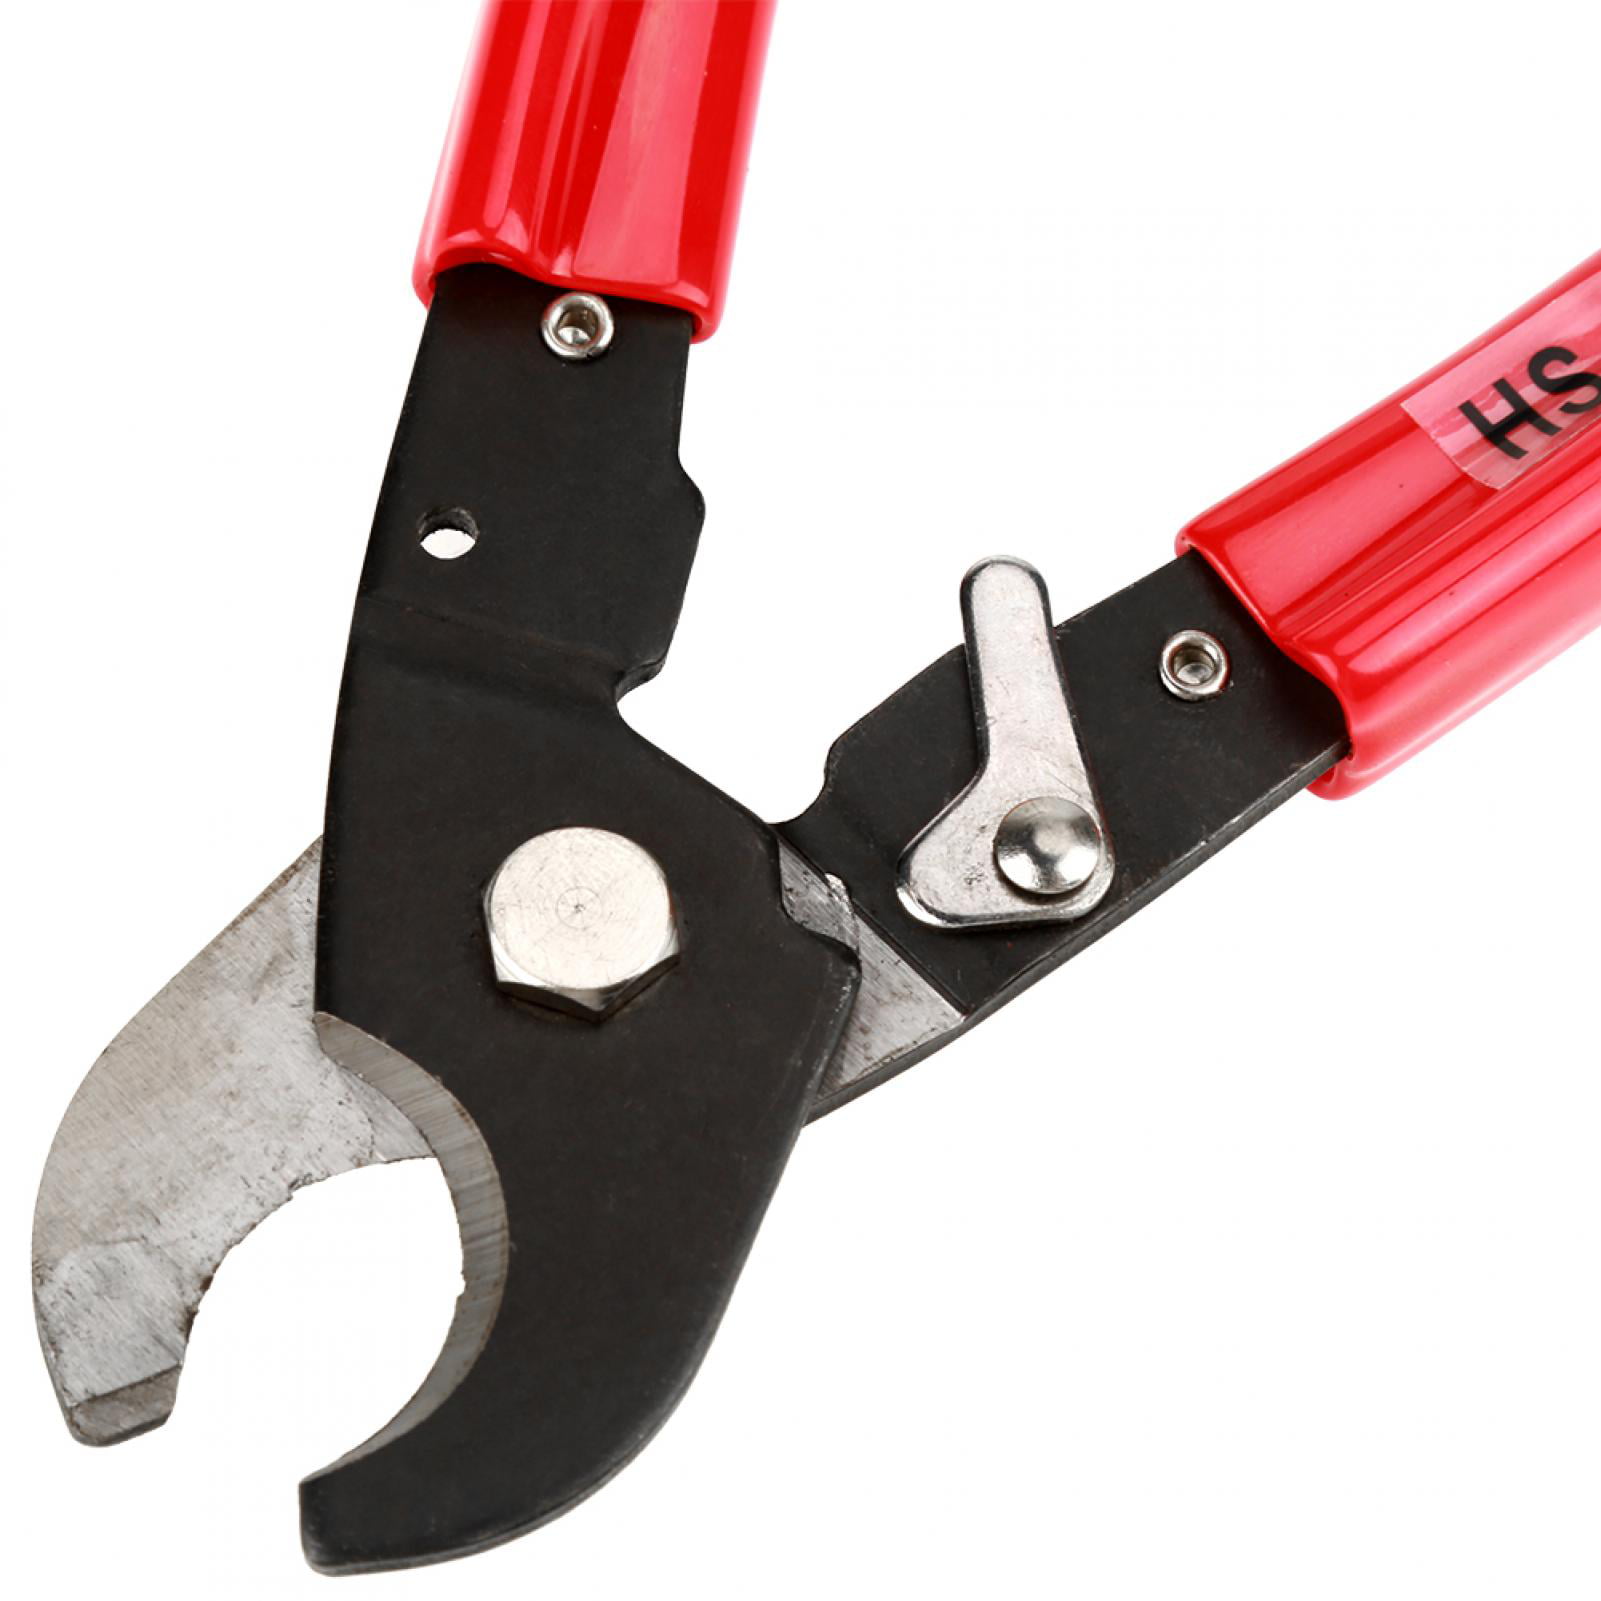 HS-206 Aluminum Copper Cable Wire Cutter Wire Cutting Tool Cut Up To 35mm² 